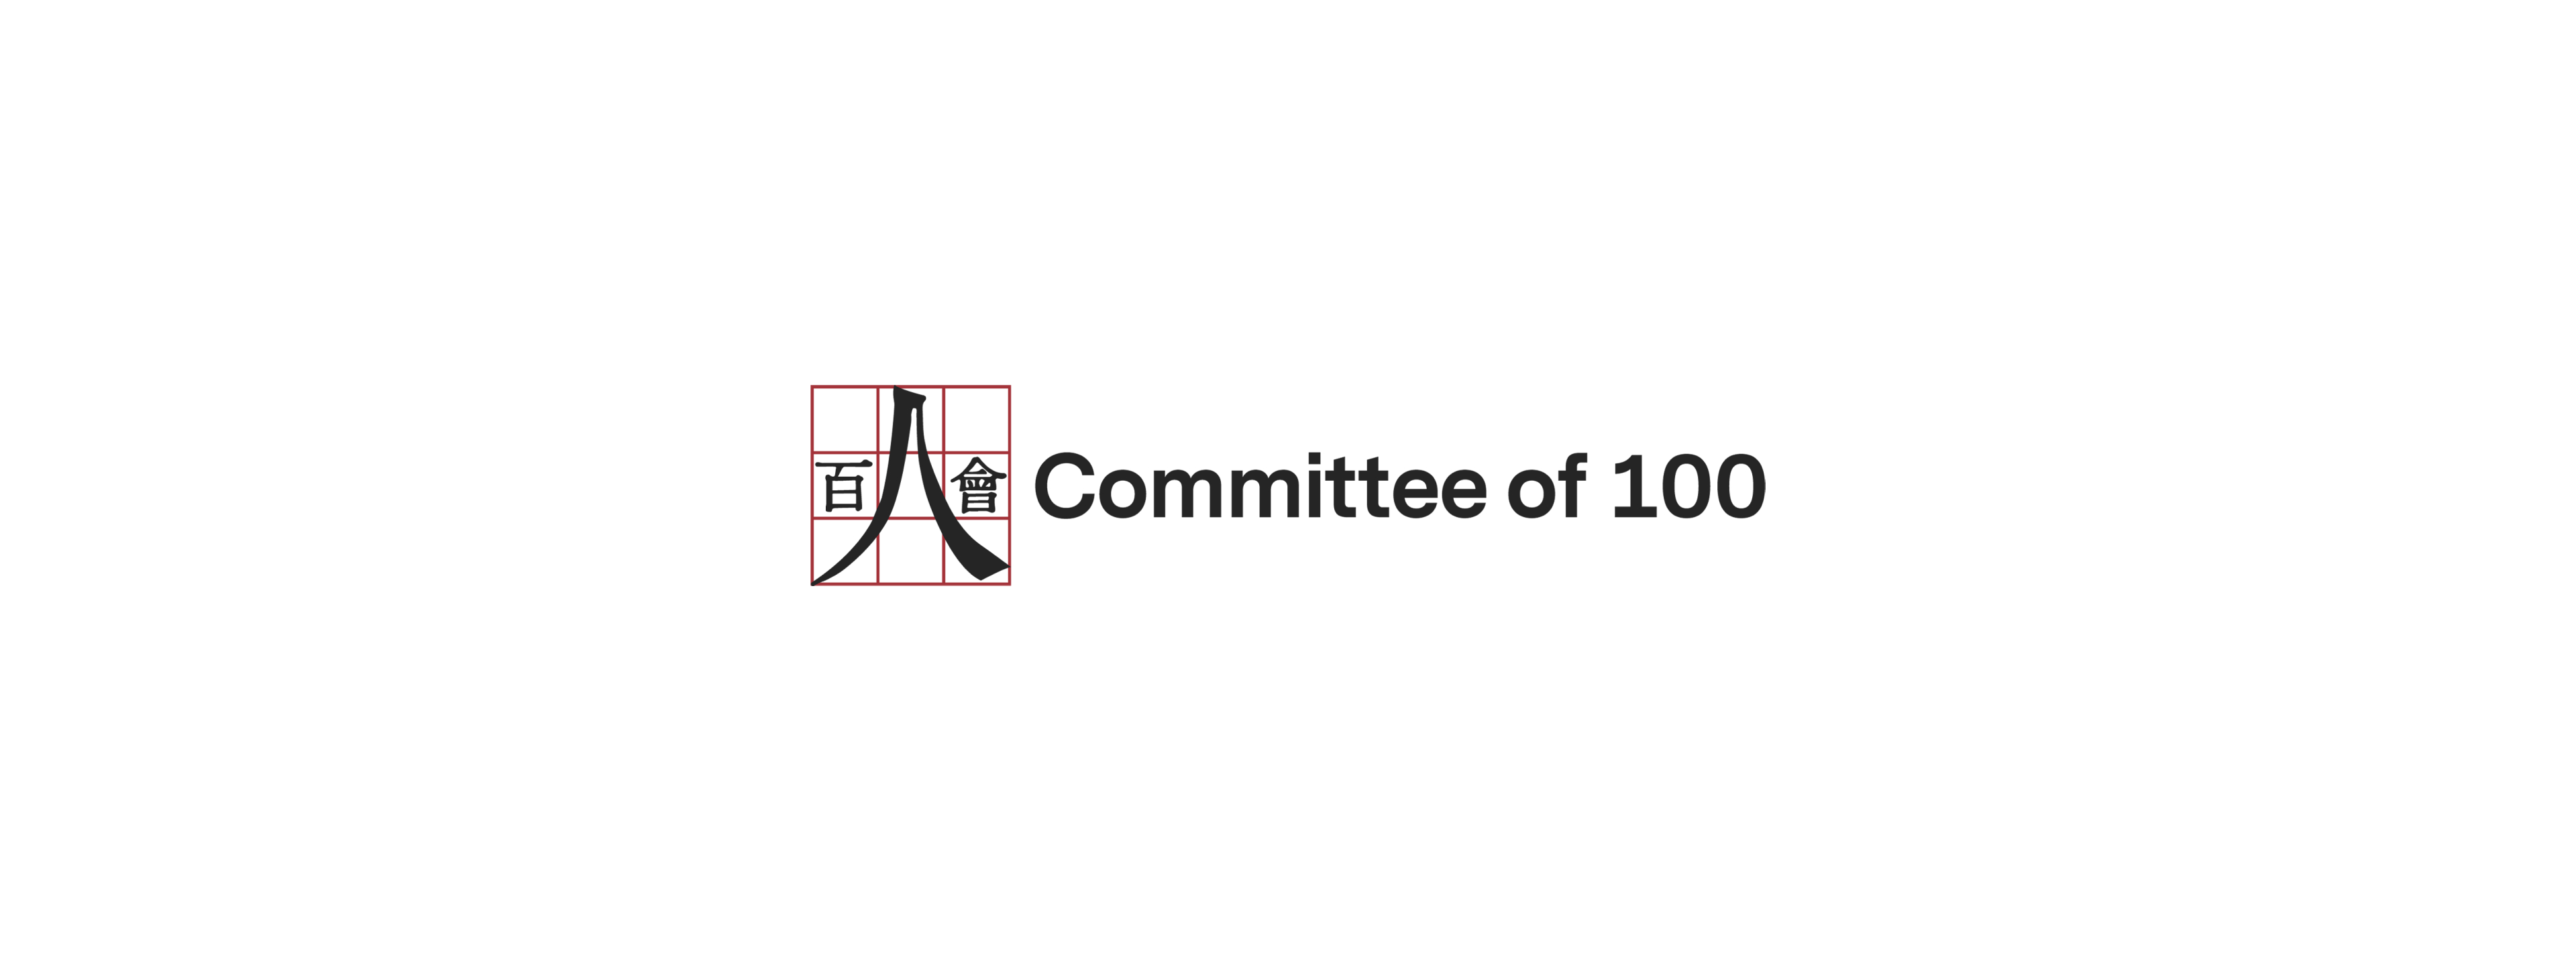 Leading Chinese American Organization Committee of 100 to Discuss Critical Issues in U.S.-China